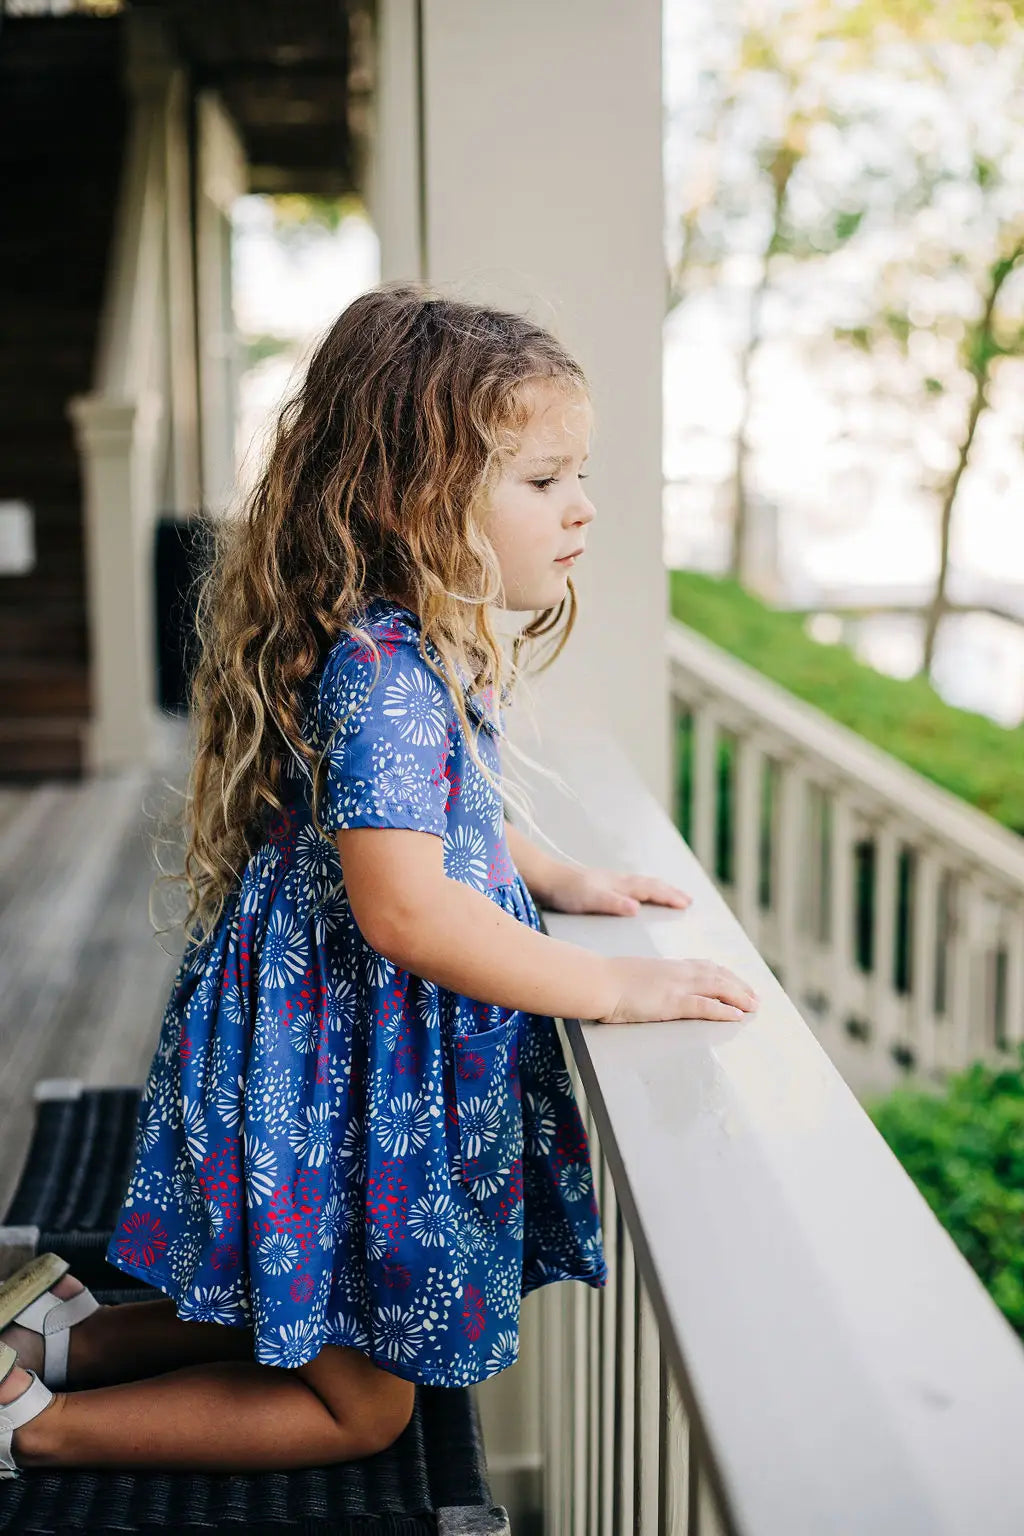 A little girl standing on a porch next to a railing in her Fireworks Twirl Dress by Sugar Bee Clothing.